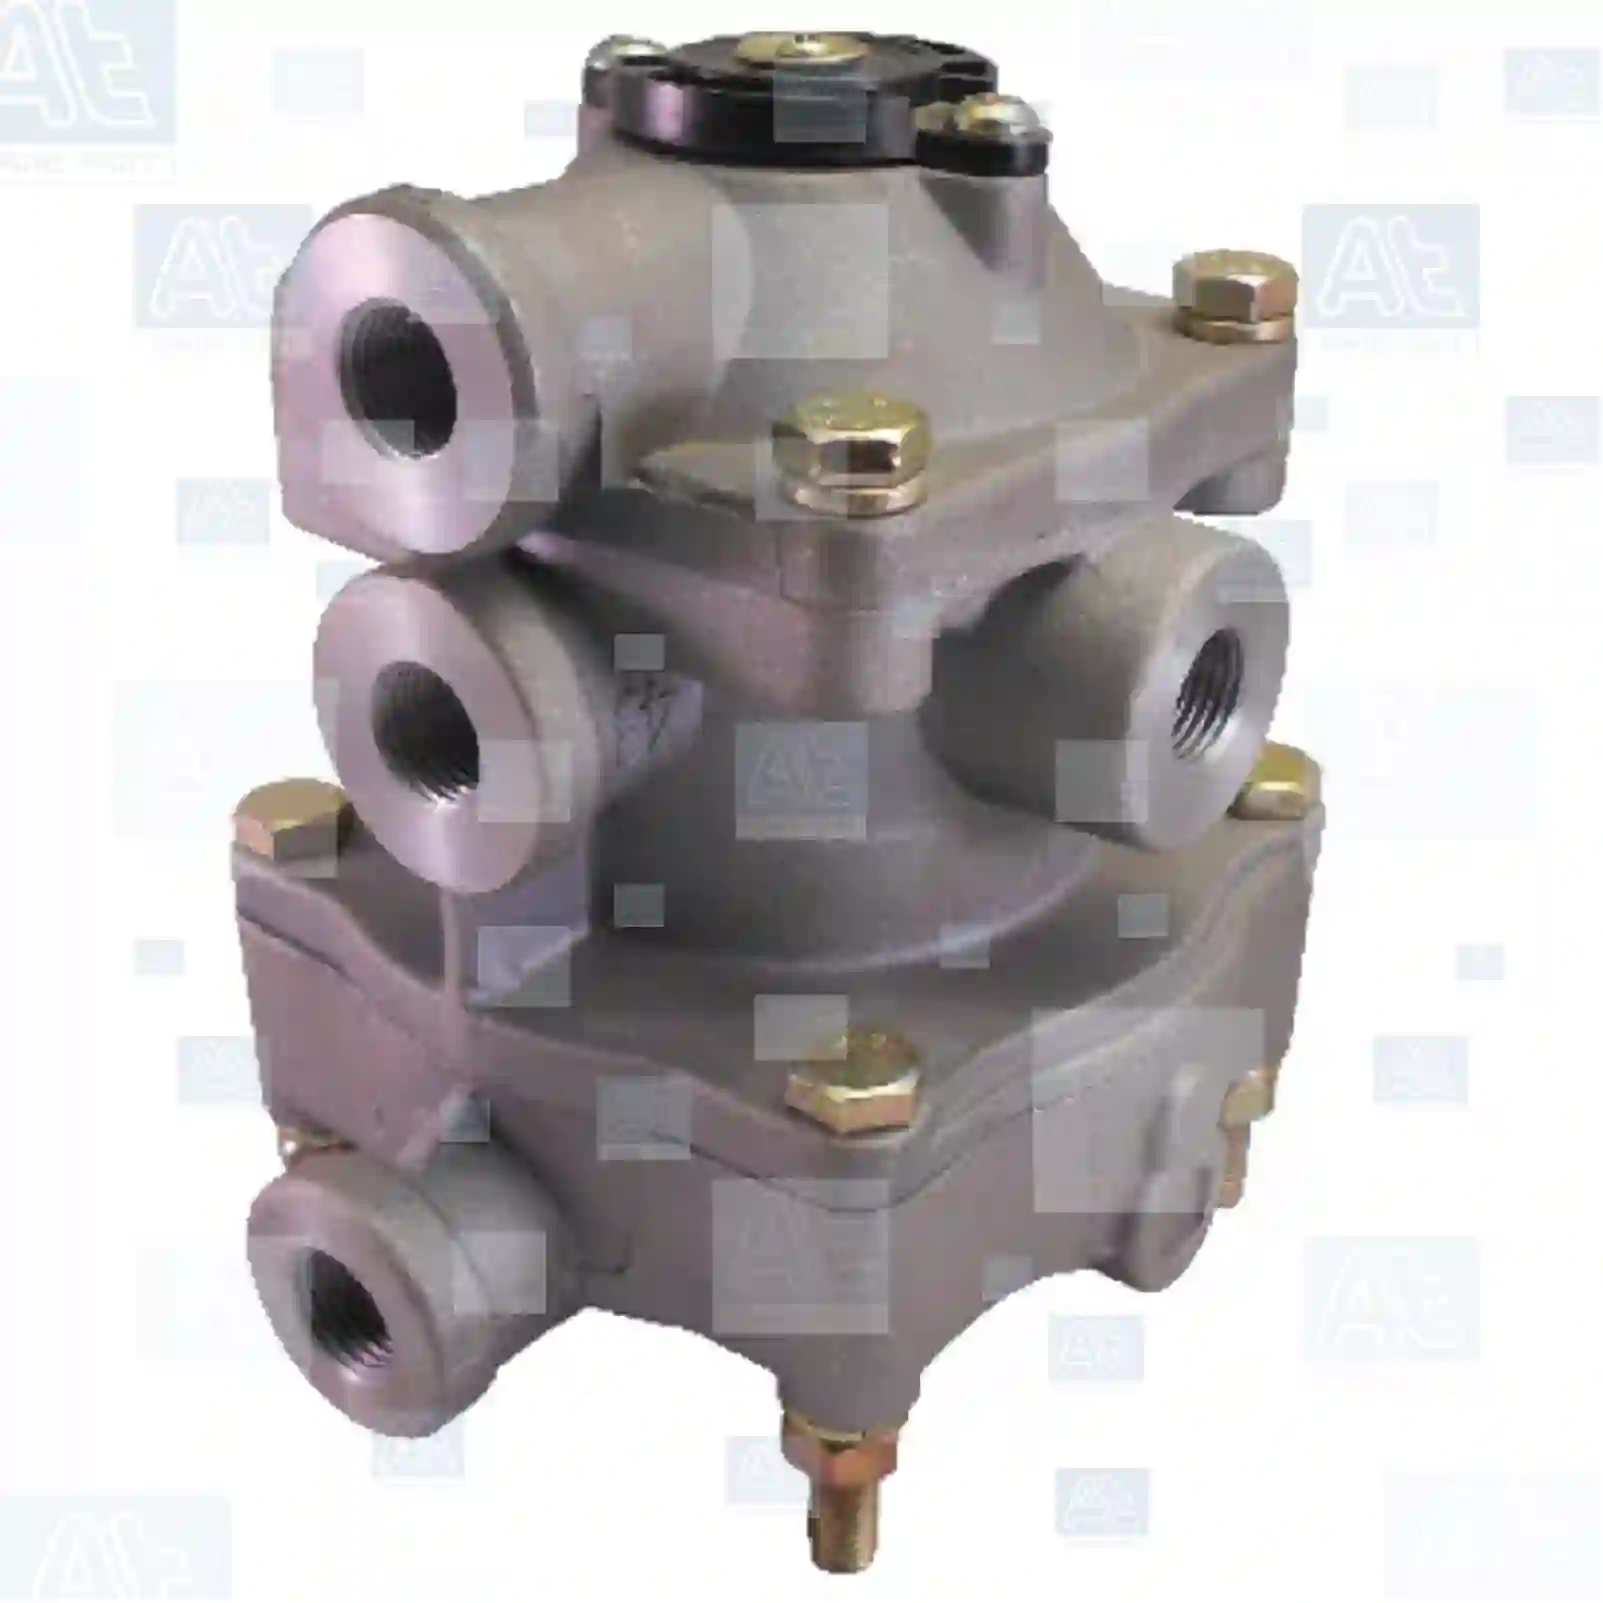 Trailer control valve, at no 77714867, oem no: 0611119, 0631119, 0701150, 0701150R, 1505146, 1506636, 611119, 631119, 701150, 701150A, 701150R, 02516806, 02516838, 02516864, 04458404, 04682684, 42066122, 502966308, 81523016031, 81523016057, 81523016062, 81523016063, 81523016196, 85500011621, 0004205471, 0004313405, 0014311805, 0014312805, 0014313405, 0014313705, 0014314805, 0024312805, 10571101, 1571101, 1935631, 293139, 295489, 324697, 571101, 1577560, 1577940 At Spare Part | Engine, Accelerator Pedal, Camshaft, Connecting Rod, Crankcase, Crankshaft, Cylinder Head, Engine Suspension Mountings, Exhaust Manifold, Exhaust Gas Recirculation, Filter Kits, Flywheel Housing, General Overhaul Kits, Engine, Intake Manifold, Oil Cleaner, Oil Cooler, Oil Filter, Oil Pump, Oil Sump, Piston & Liner, Sensor & Switch, Timing Case, Turbocharger, Cooling System, Belt Tensioner, Coolant Filter, Coolant Pipe, Corrosion Prevention Agent, Drive, Expansion Tank, Fan, Intercooler, Monitors & Gauges, Radiator, Thermostat, V-Belt / Timing belt, Water Pump, Fuel System, Electronical Injector Unit, Feed Pump, Fuel Filter, cpl., Fuel Gauge Sender,  Fuel Line, Fuel Pump, Fuel Tank, Injection Line Kit, Injection Pump, Exhaust System, Clutch & Pedal, Gearbox, Propeller Shaft, Axles, Brake System, Hubs & Wheels, Suspension, Leaf Spring, Universal Parts / Accessories, Steering, Electrical System, Cabin Trailer control valve, at no 77714867, oem no: 0611119, 0631119, 0701150, 0701150R, 1505146, 1506636, 611119, 631119, 701150, 701150A, 701150R, 02516806, 02516838, 02516864, 04458404, 04682684, 42066122, 502966308, 81523016031, 81523016057, 81523016062, 81523016063, 81523016196, 85500011621, 0004205471, 0004313405, 0014311805, 0014312805, 0014313405, 0014313705, 0014314805, 0024312805, 10571101, 1571101, 1935631, 293139, 295489, 324697, 571101, 1577560, 1577940 At Spare Part | Engine, Accelerator Pedal, Camshaft, Connecting Rod, Crankcase, Crankshaft, Cylinder Head, Engine Suspension Mountings, Exhaust Manifold, Exhaust Gas Recirculation, Filter Kits, Flywheel Housing, General Overhaul Kits, Engine, Intake Manifold, Oil Cleaner, Oil Cooler, Oil Filter, Oil Pump, Oil Sump, Piston & Liner, Sensor & Switch, Timing Case, Turbocharger, Cooling System, Belt Tensioner, Coolant Filter, Coolant Pipe, Corrosion Prevention Agent, Drive, Expansion Tank, Fan, Intercooler, Monitors & Gauges, Radiator, Thermostat, V-Belt / Timing belt, Water Pump, Fuel System, Electronical Injector Unit, Feed Pump, Fuel Filter, cpl., Fuel Gauge Sender,  Fuel Line, Fuel Pump, Fuel Tank, Injection Line Kit, Injection Pump, Exhaust System, Clutch & Pedal, Gearbox, Propeller Shaft, Axles, Brake System, Hubs & Wheels, Suspension, Leaf Spring, Universal Parts / Accessories, Steering, Electrical System, Cabin